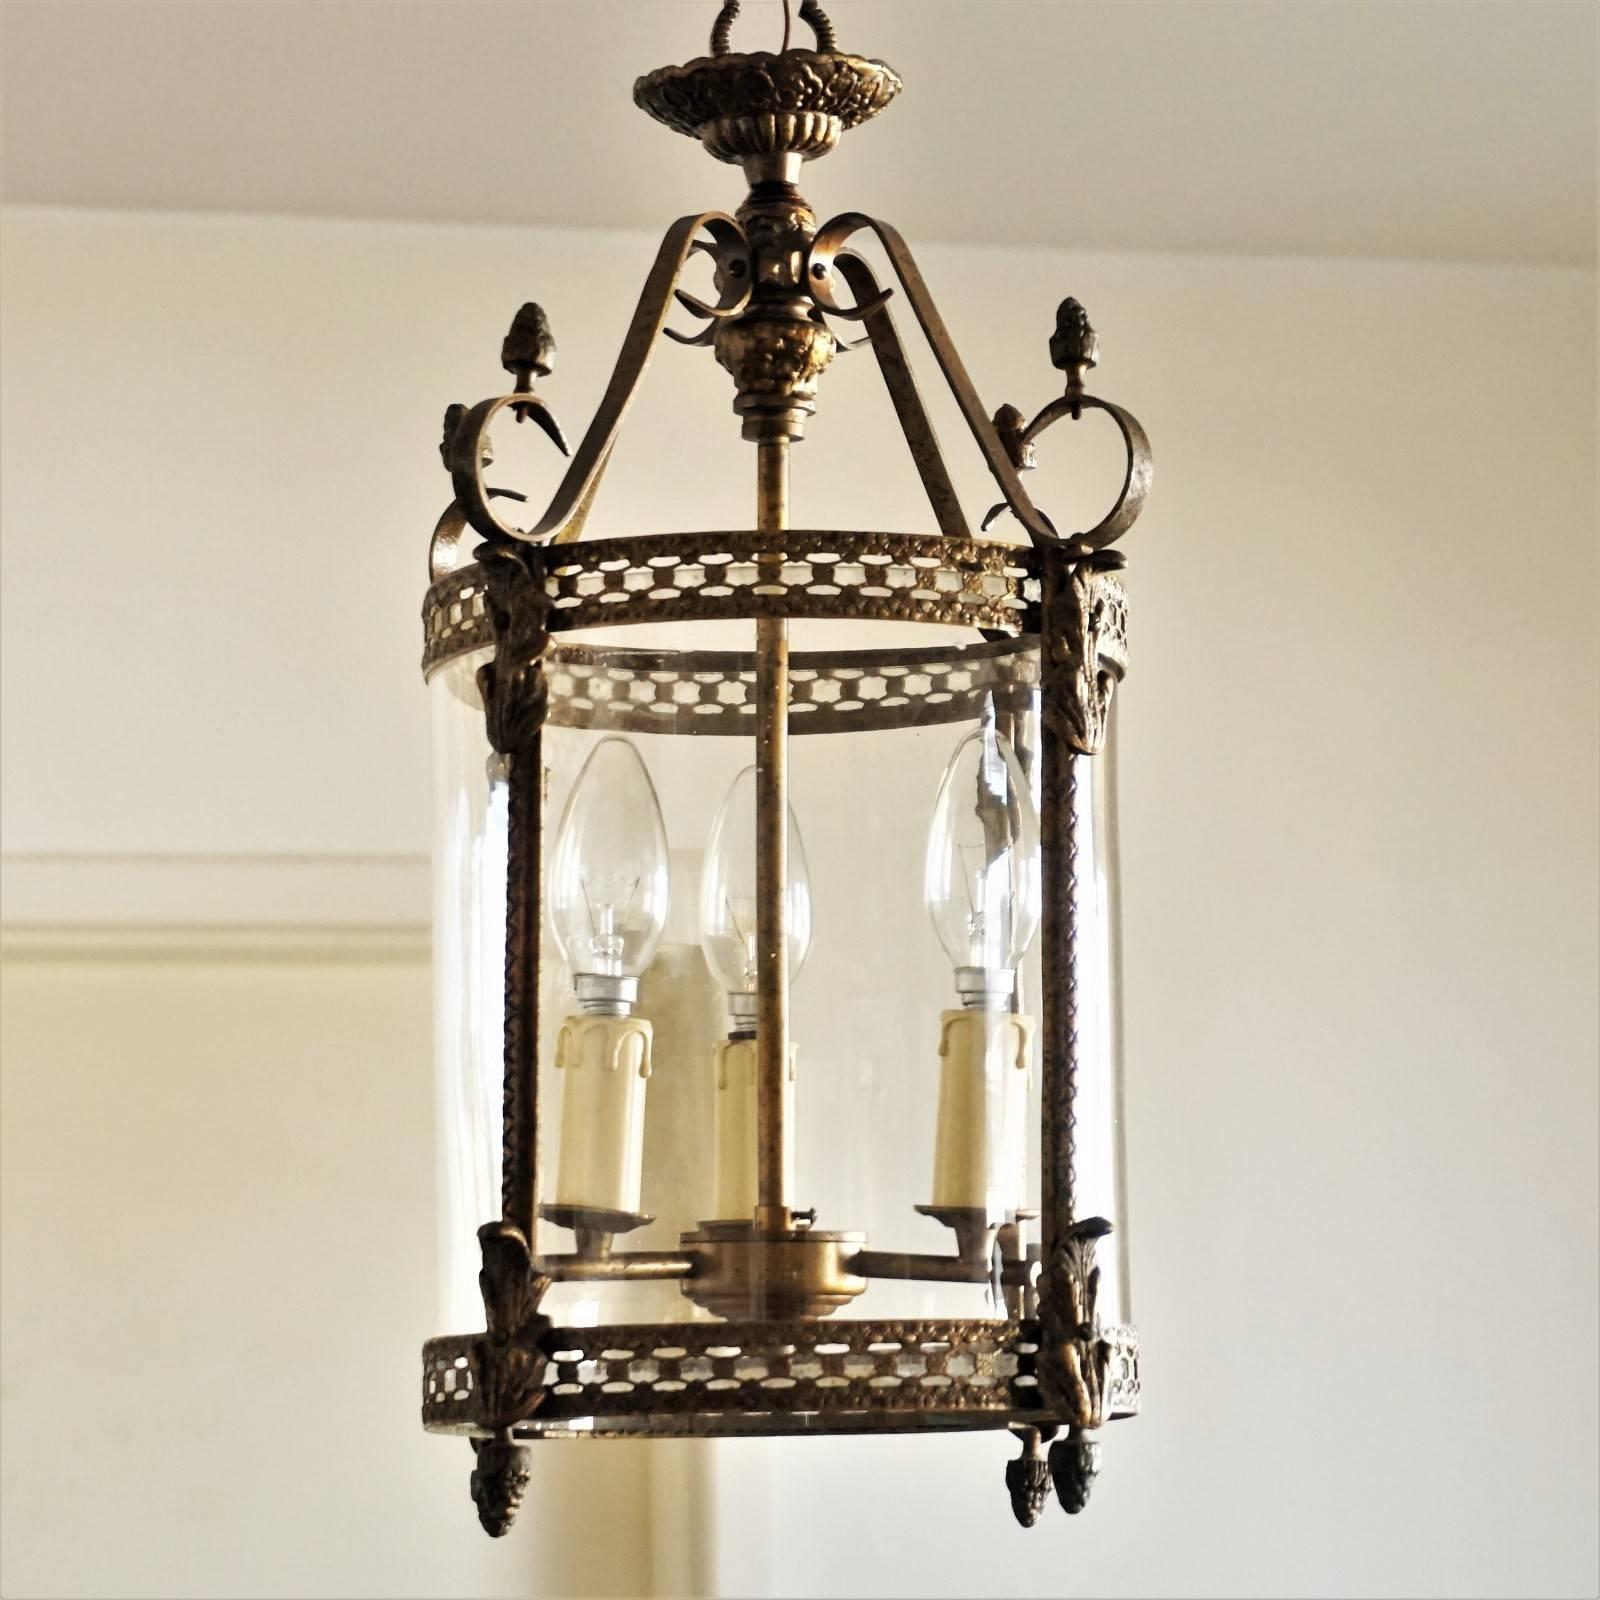 Art Nouveau brass three-light lantern, pendant with glass cylinder shade, circa 1910.

European wiring: Three x E14 lamp sockets
Measures: Total height: 39 1/2 in (100 cm)
Height without hanging chain: 19 3/4 in (50 cm)
Diameter: 11 in (28